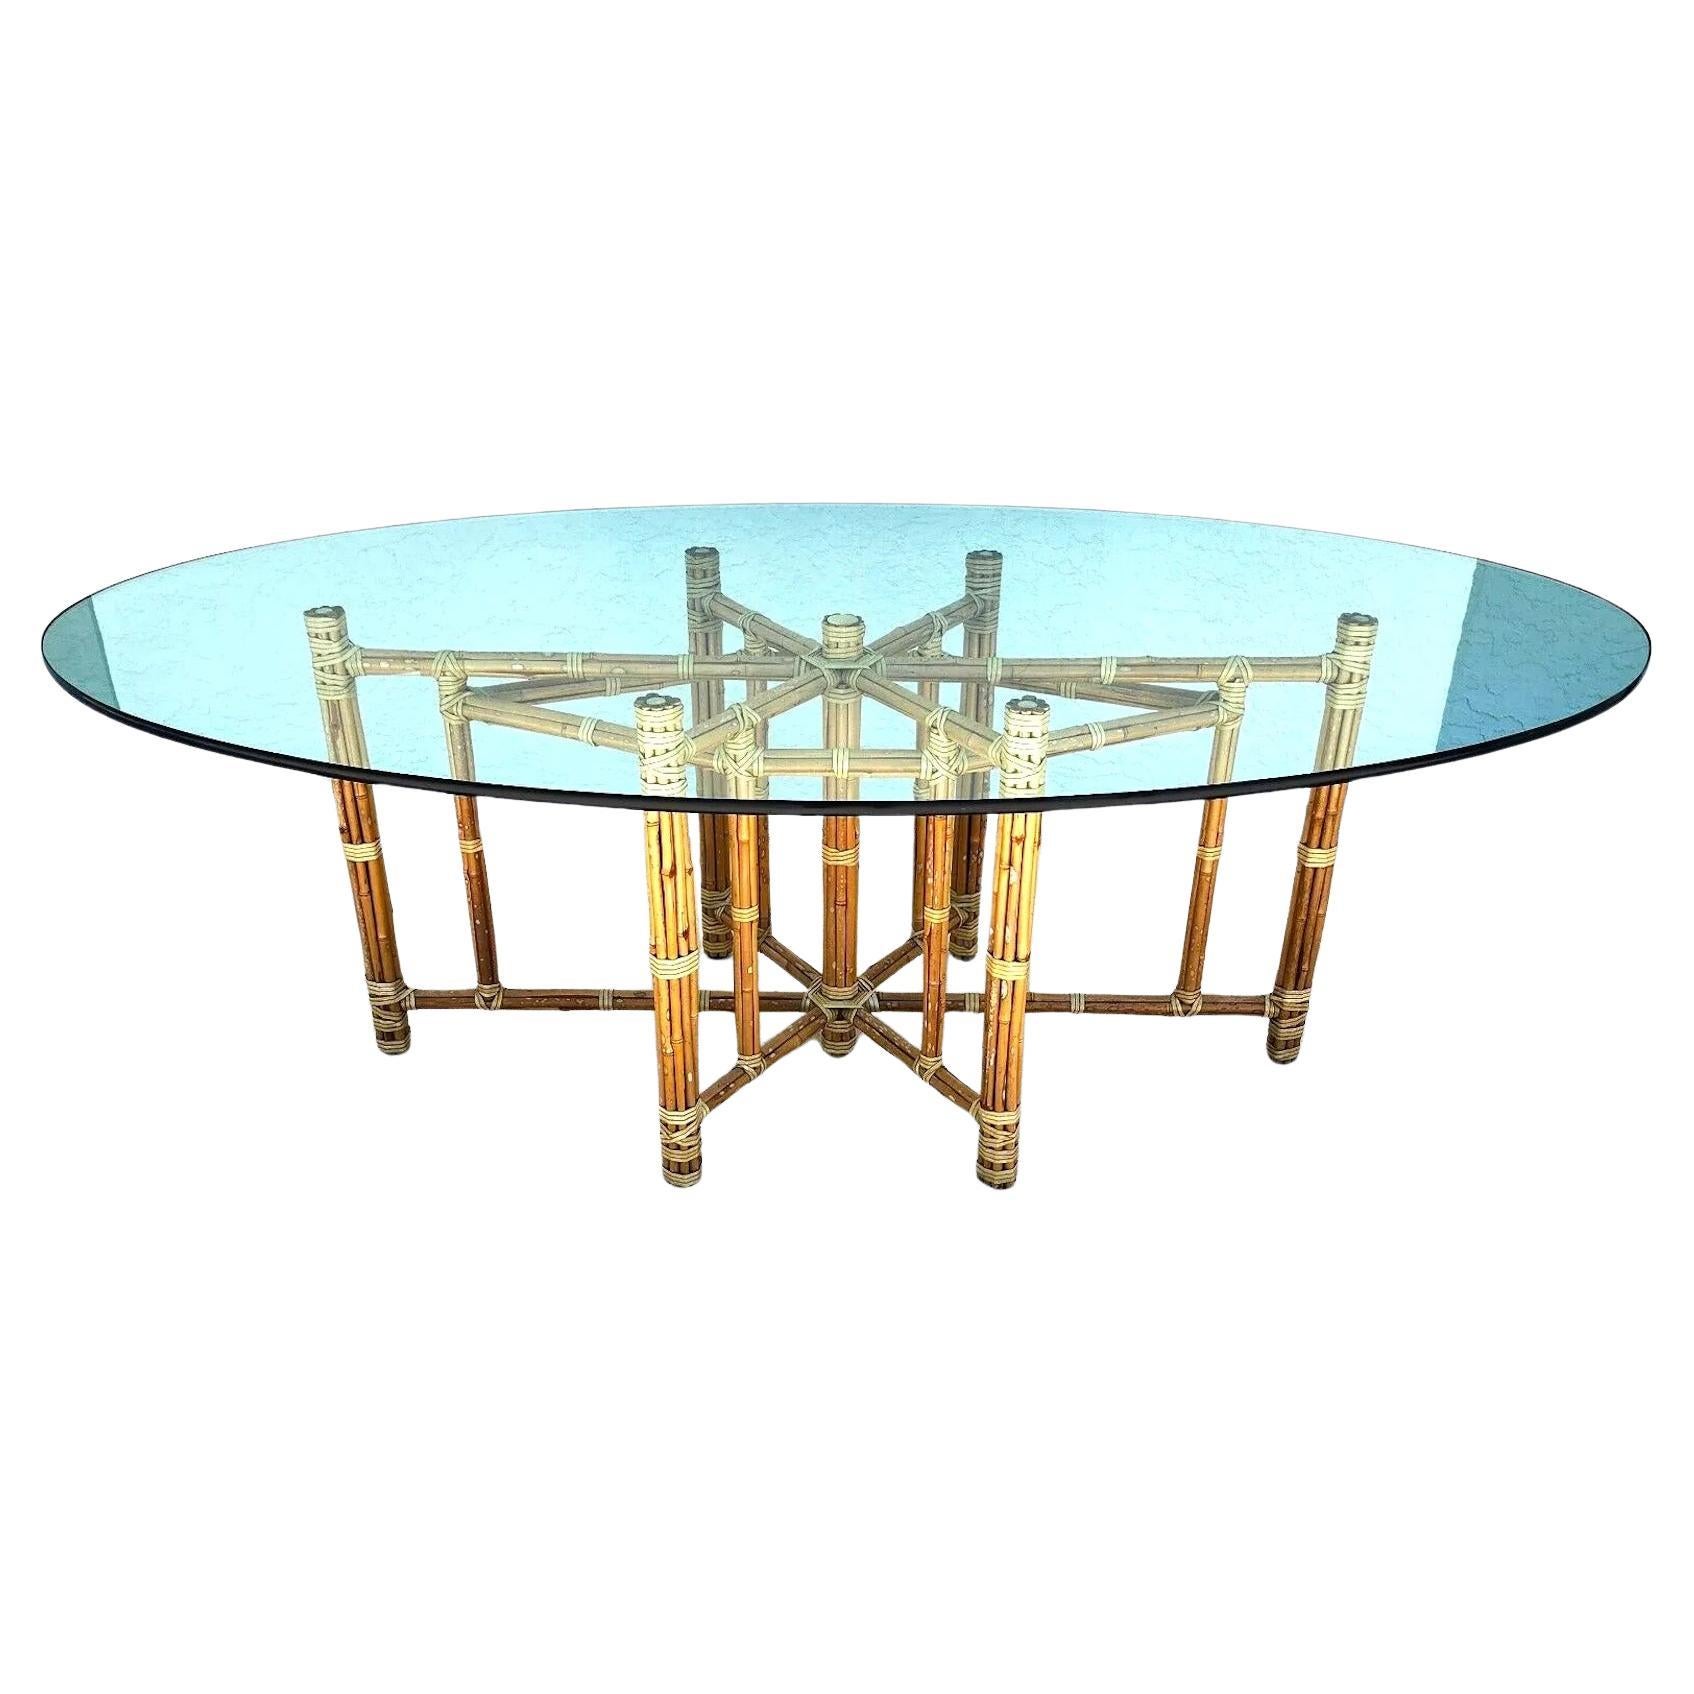 McGuire Bamboo Dining Table Oval